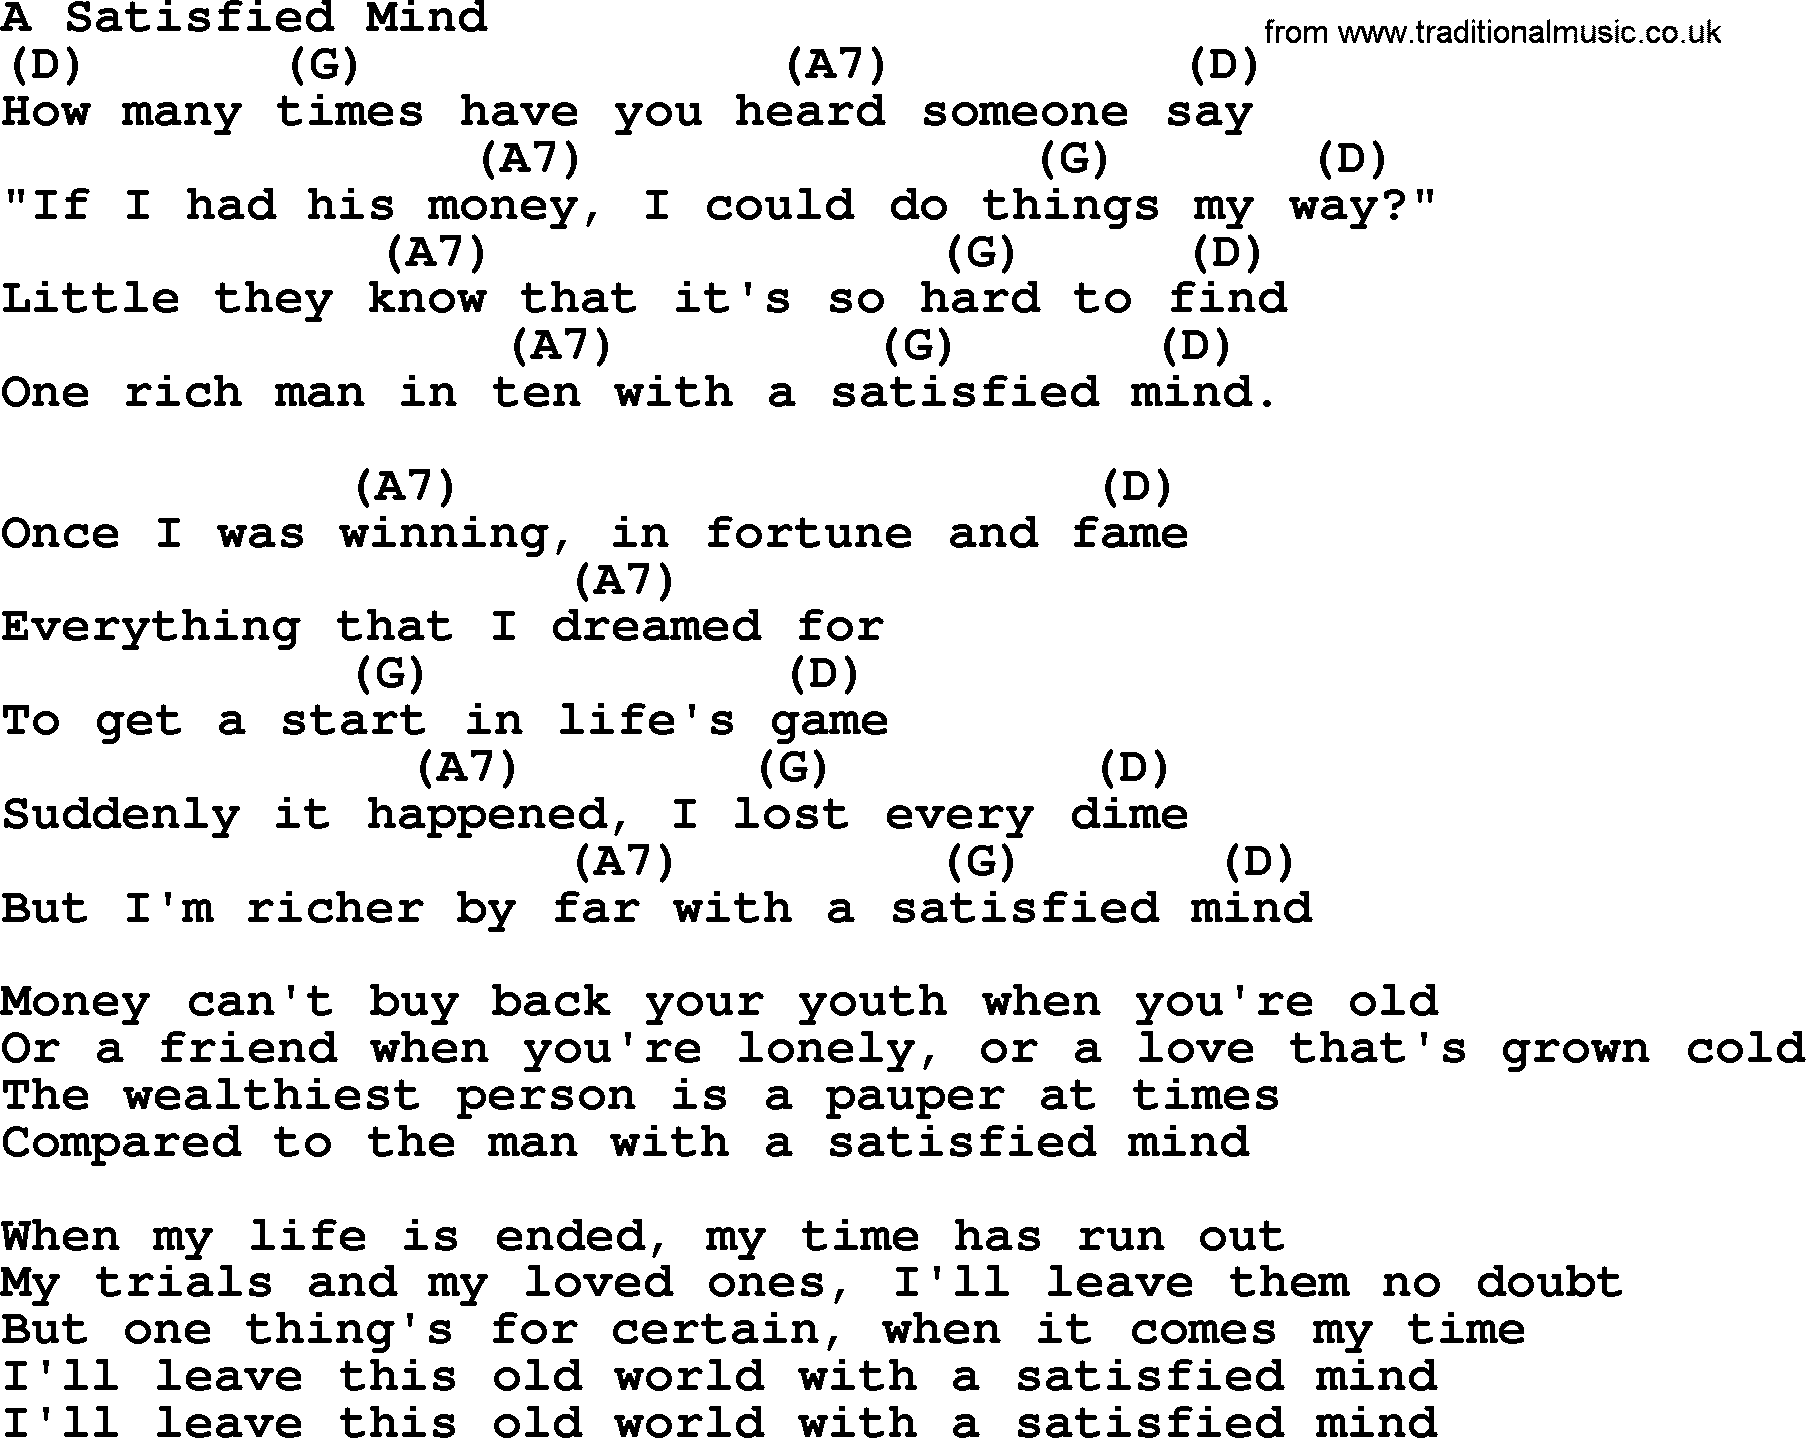 Bluegrass song: A Satisfied Mind, lyrics and chords